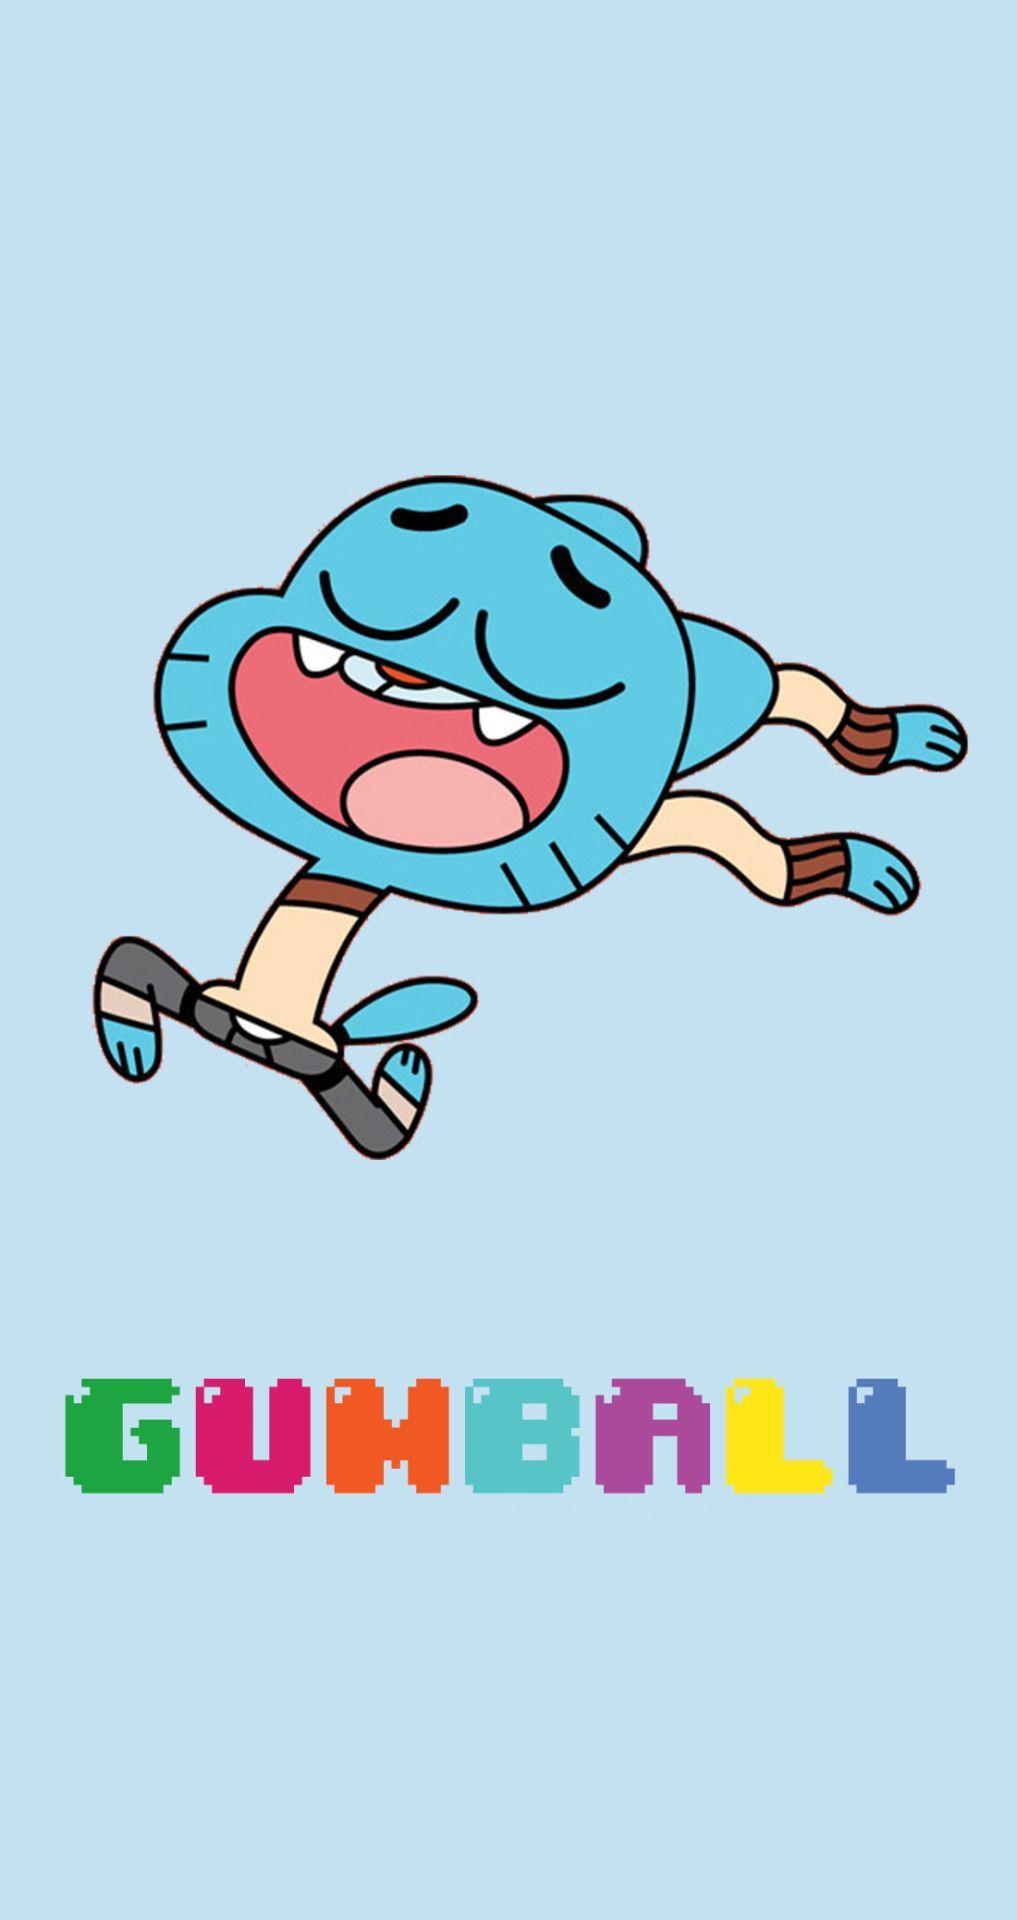 gumball and darwin wallpaper by ToJaBlazejek3323 - Download on